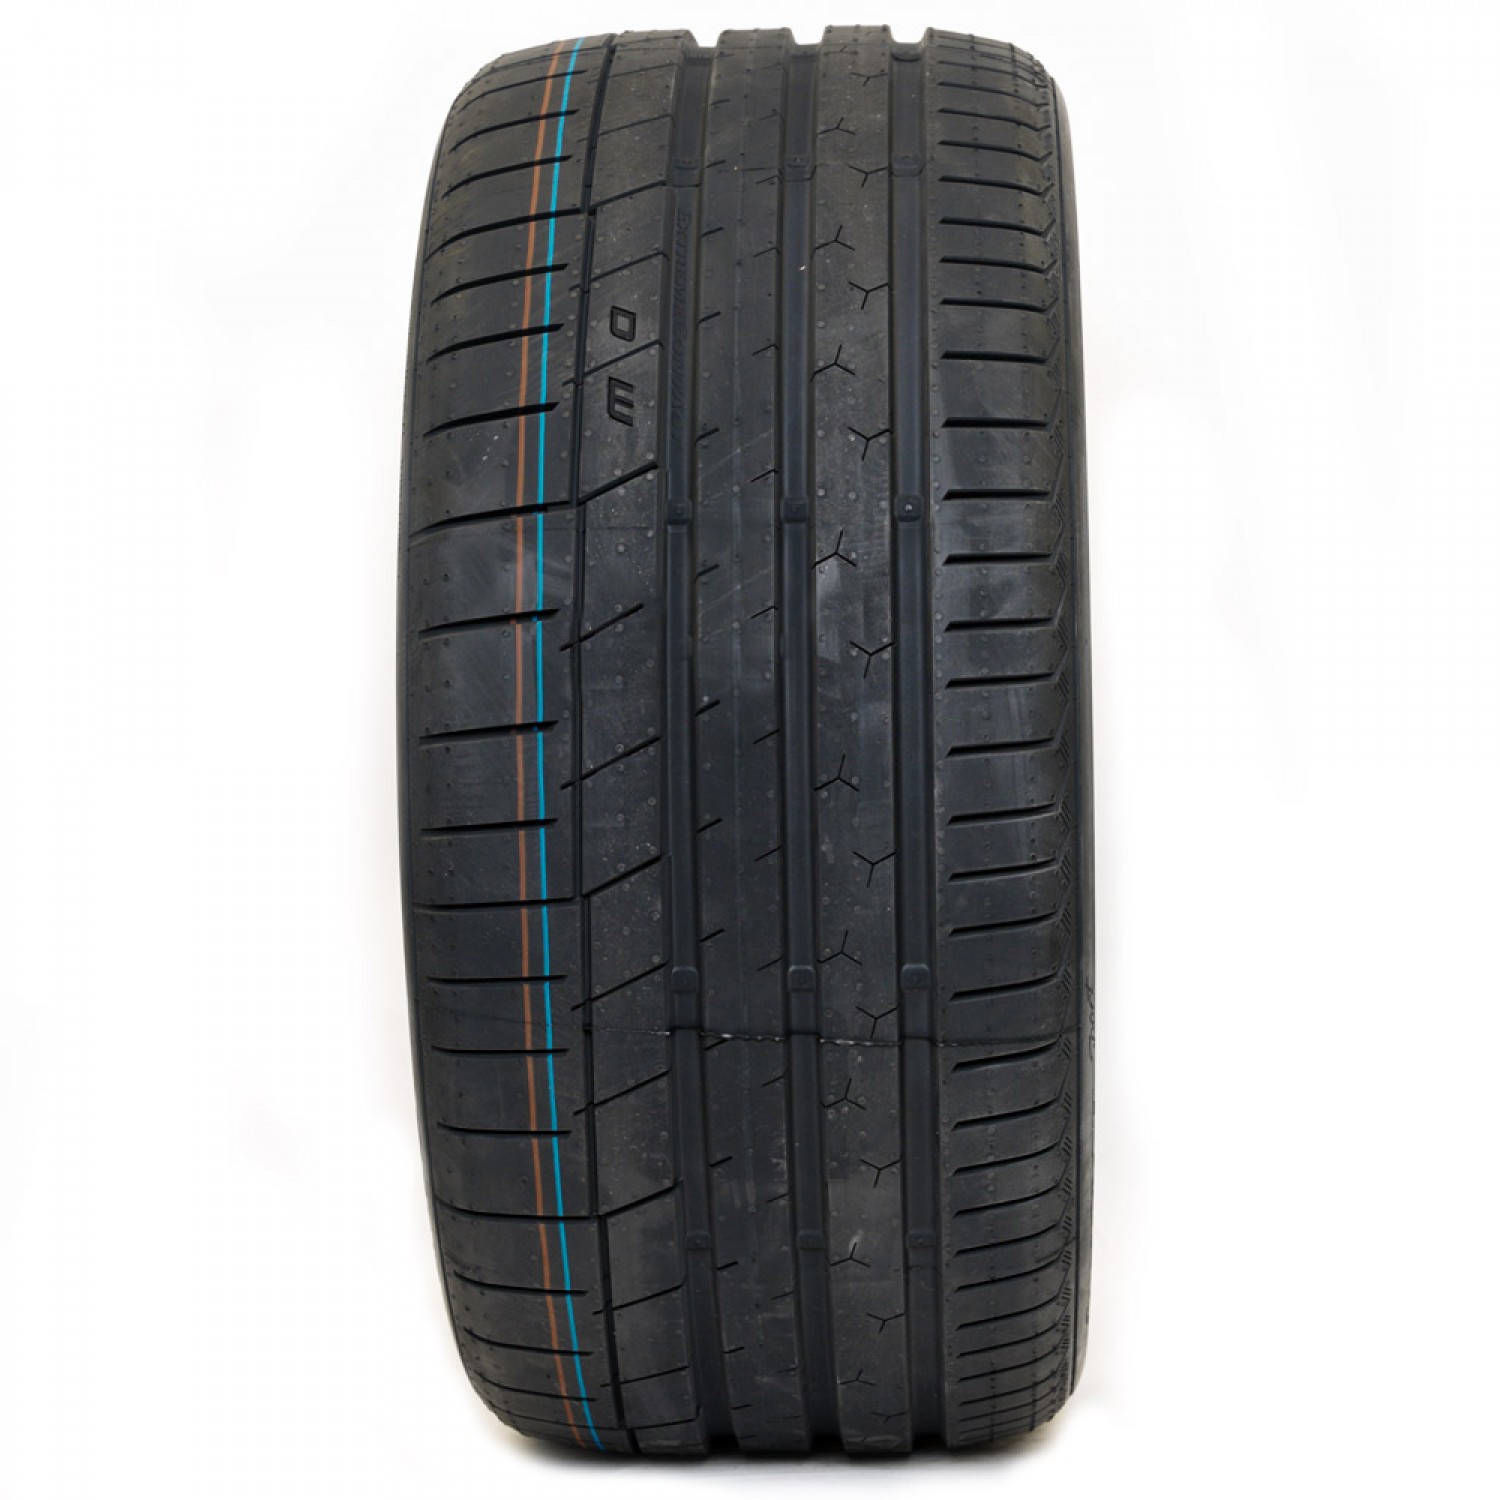 Continental ExtremeContact Sport Performance Radial Tire 275/35ZR19 